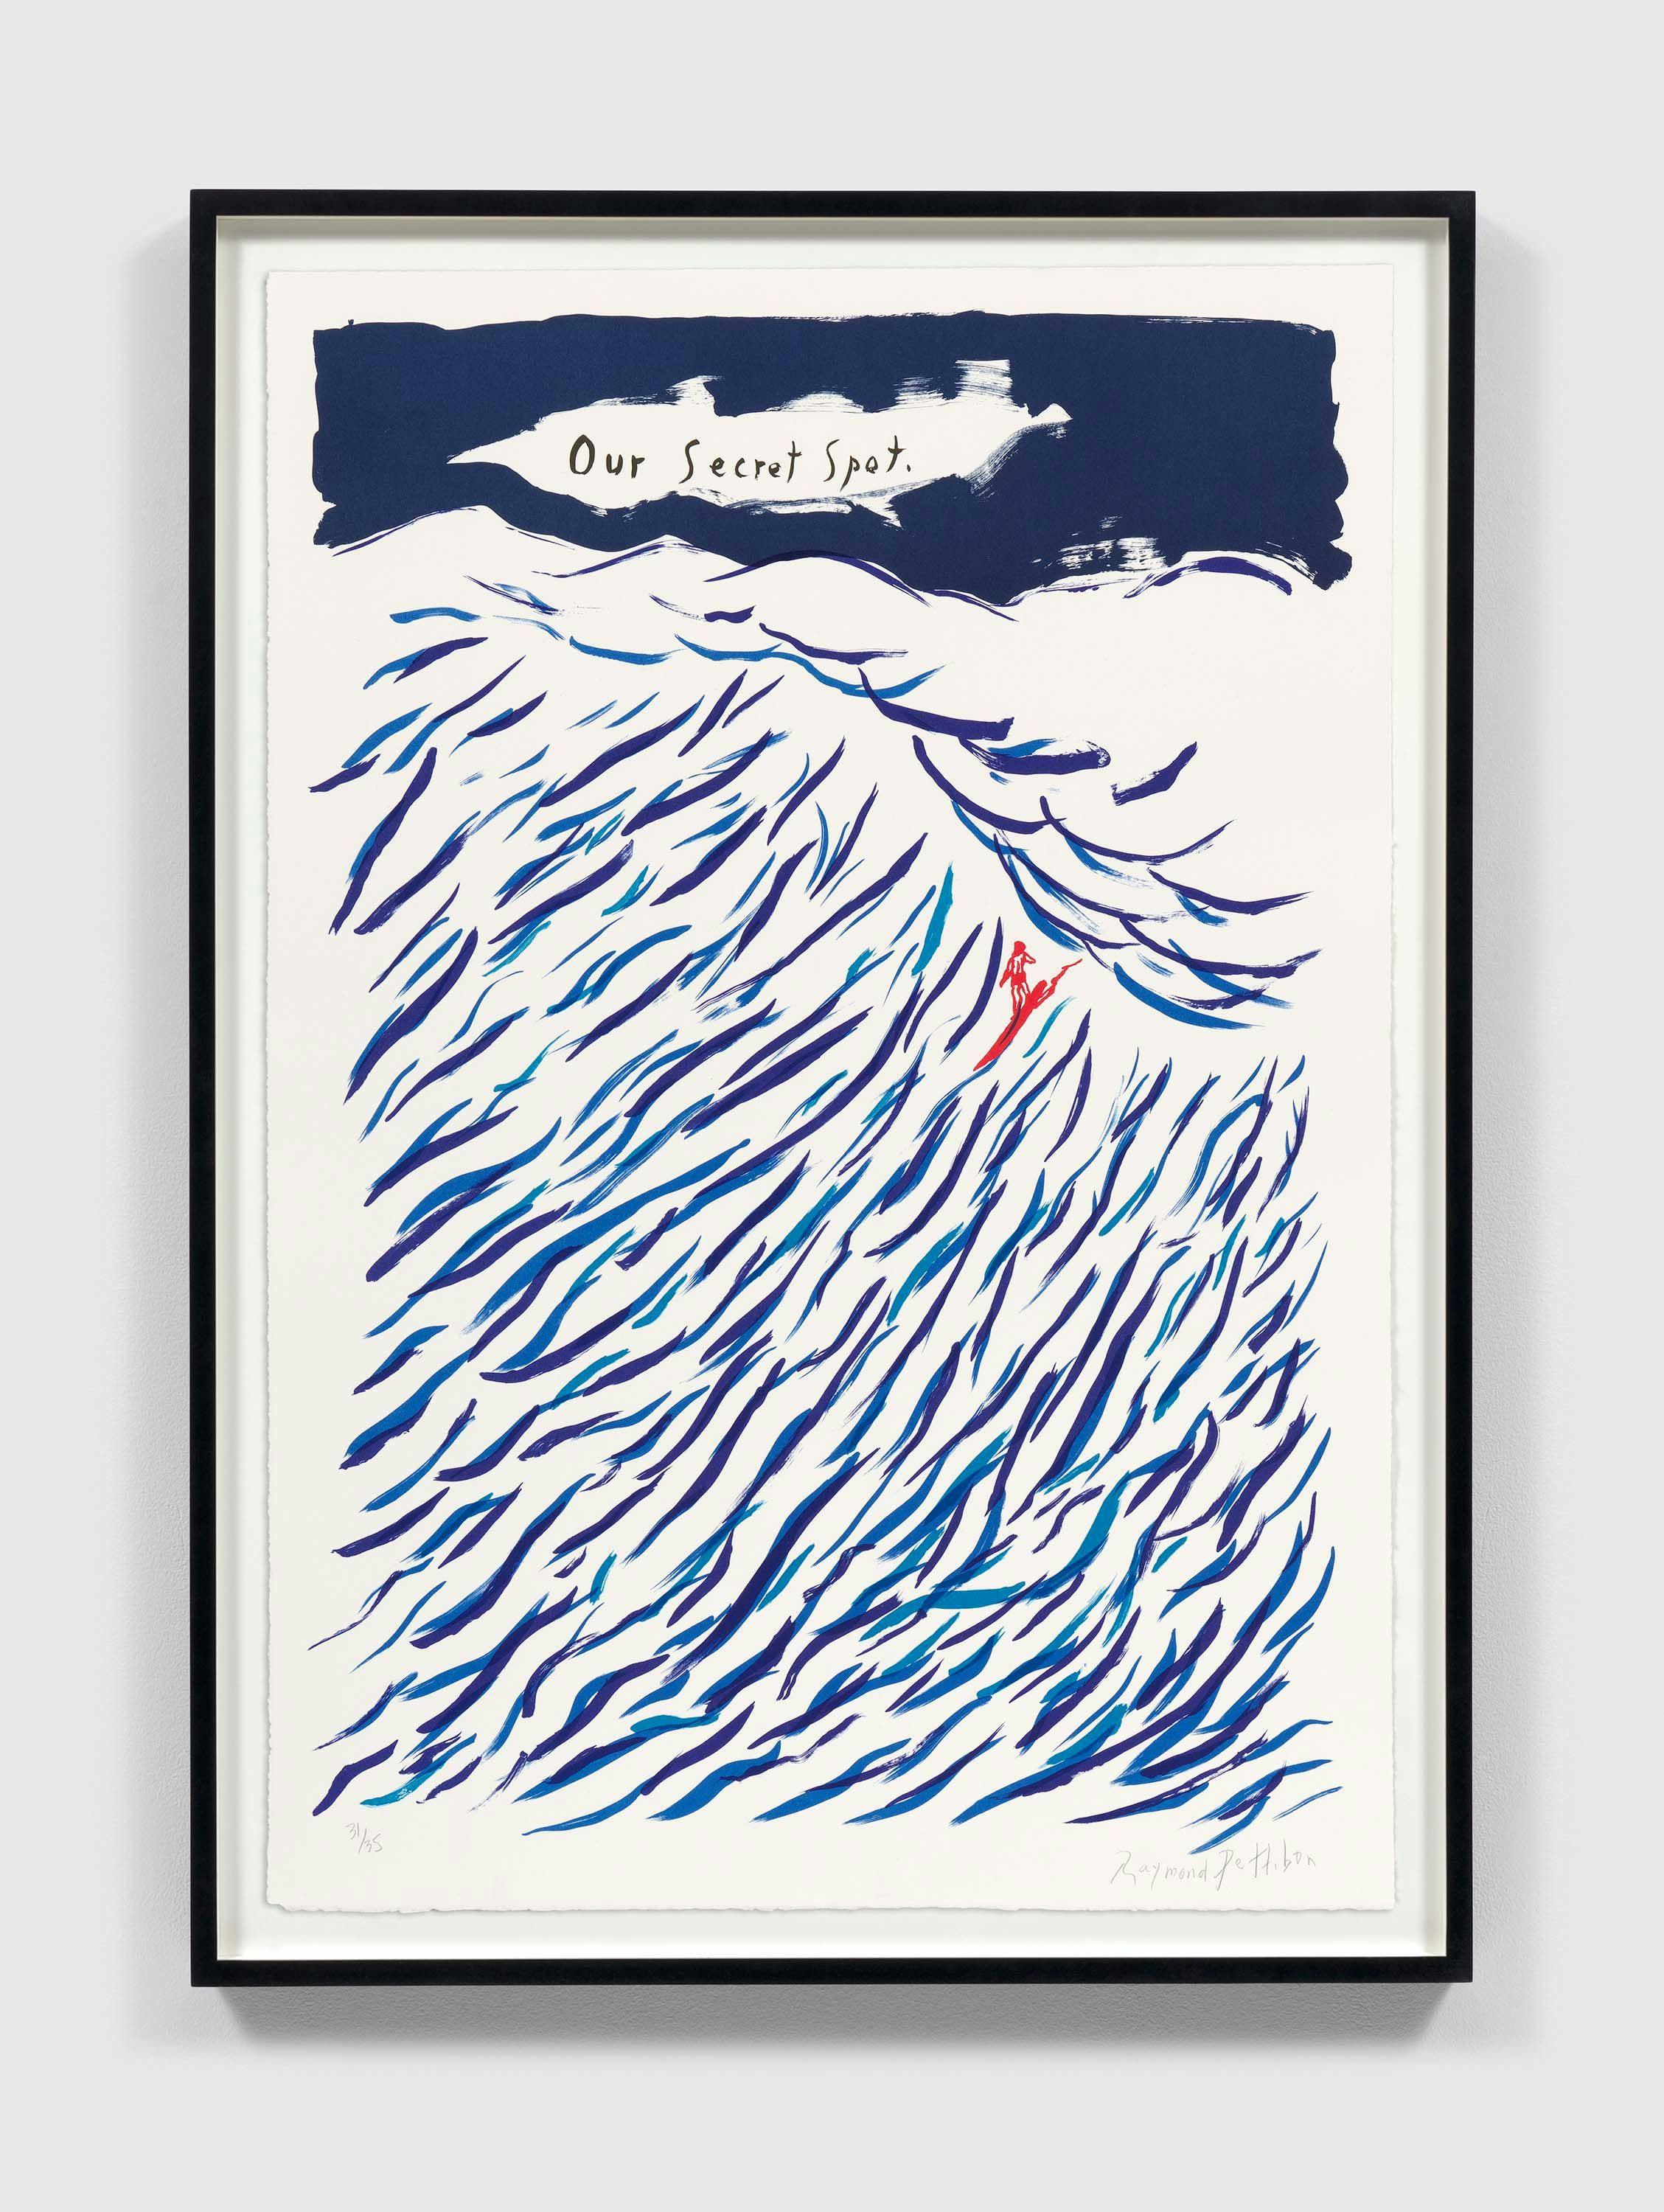 A six-color lithograph on Rives BFK paper by Raymond Pettibon, called No Title (Our Secret Sport.), dated 2022.